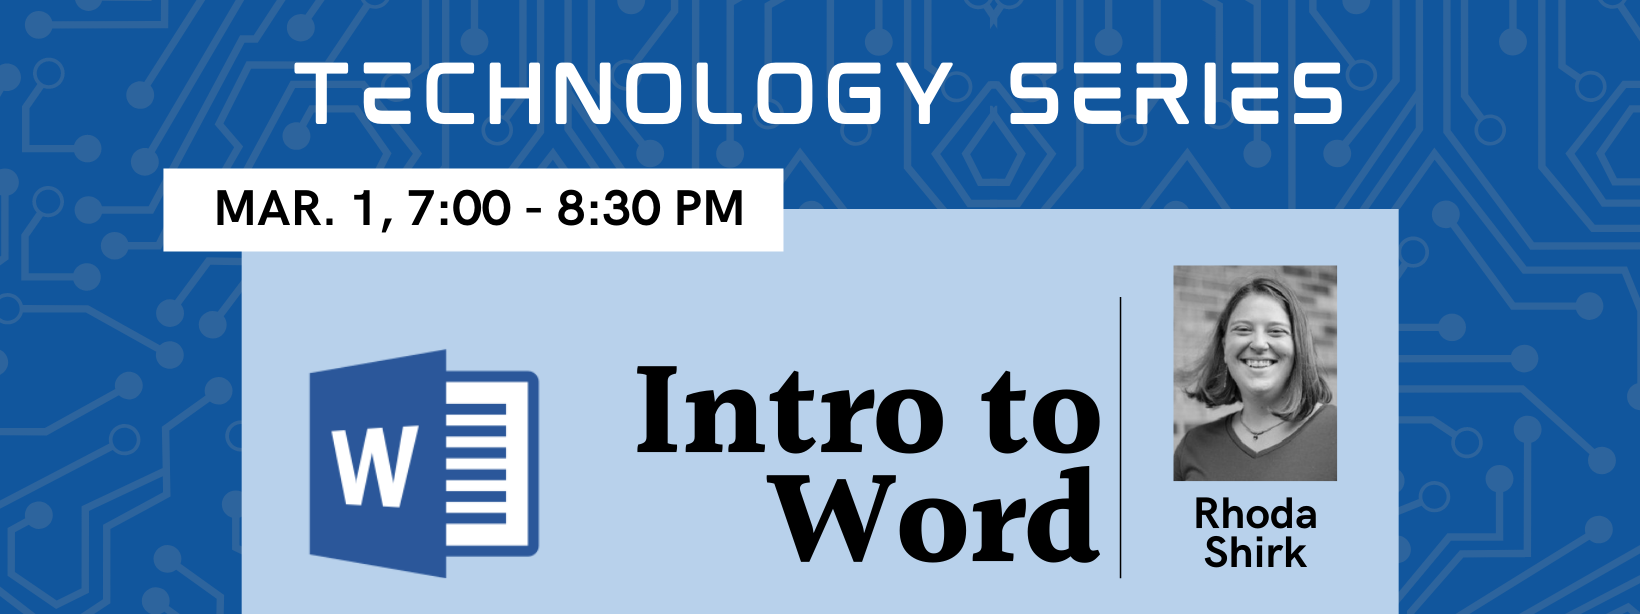 Intro to Word